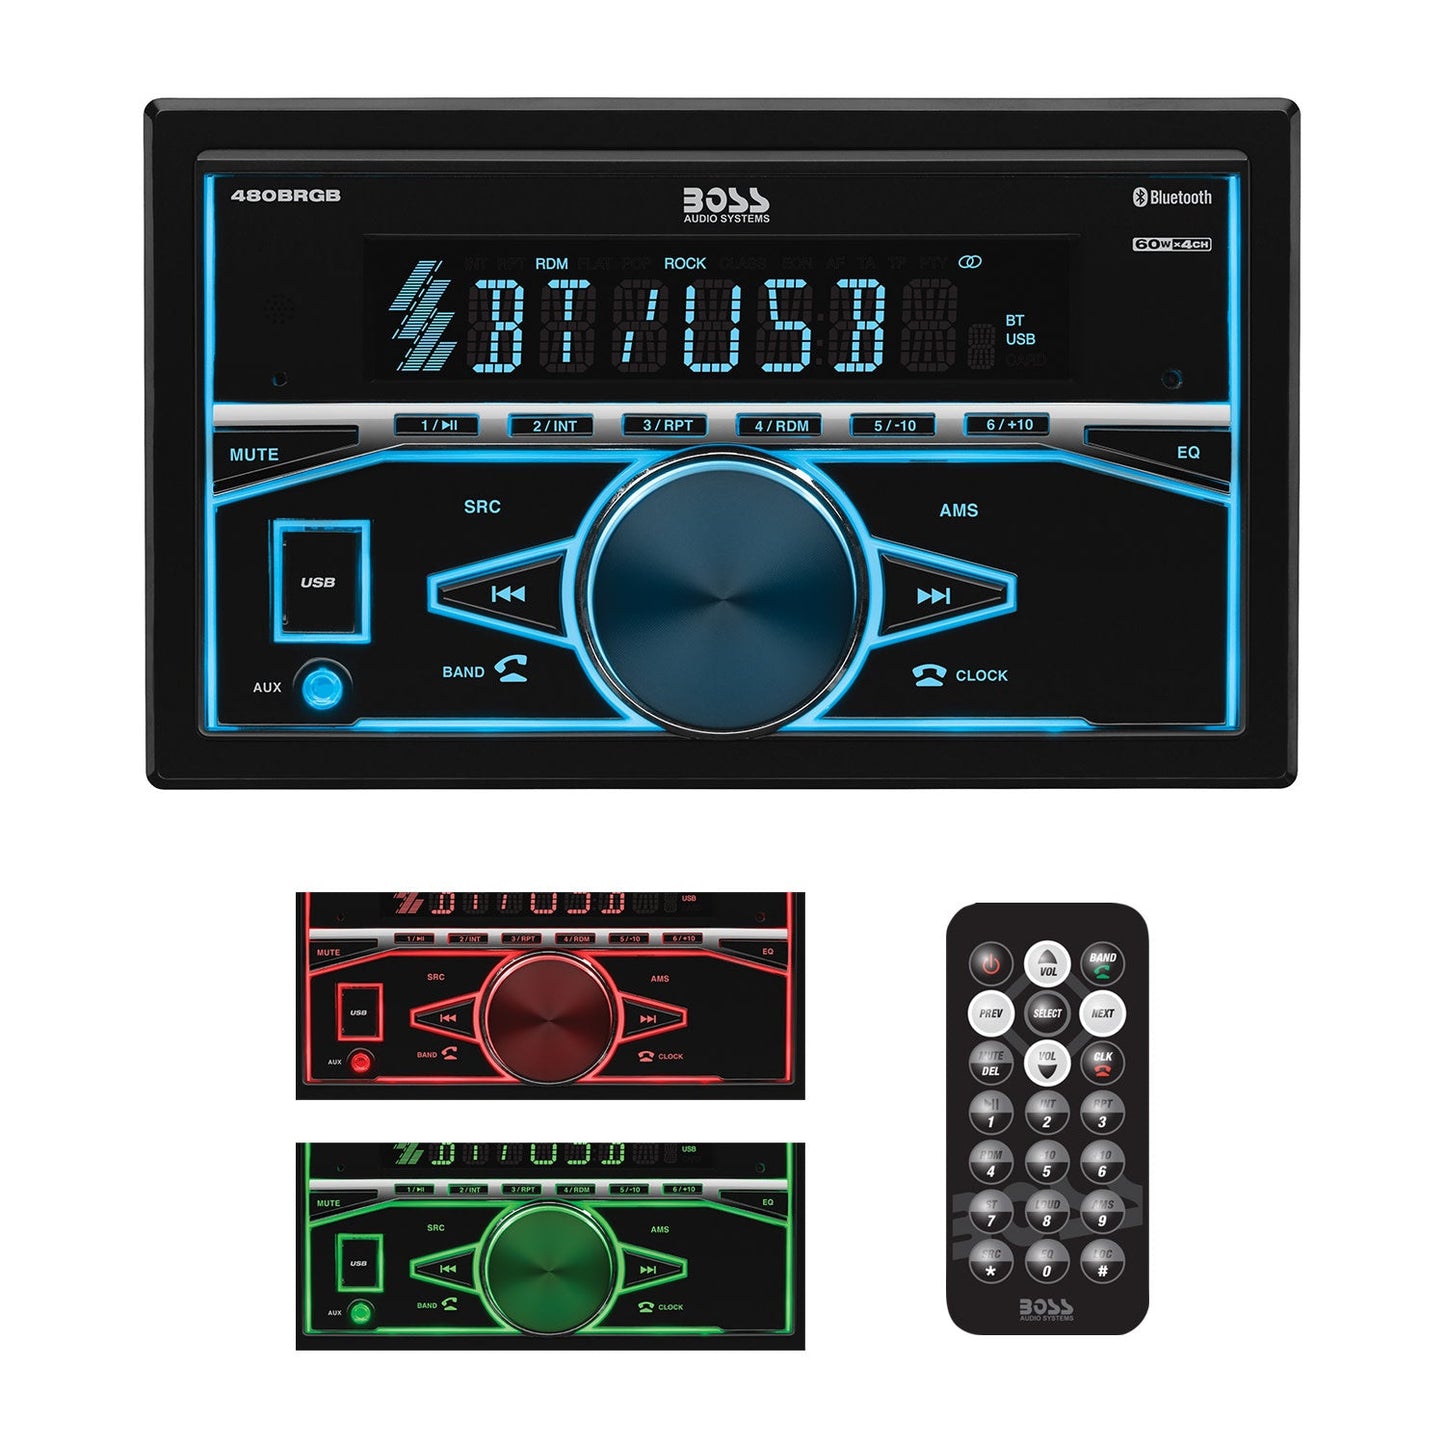 BOSS Audio Systems, In-Dash > Double Din, Model 480BRGB, retail packaging view